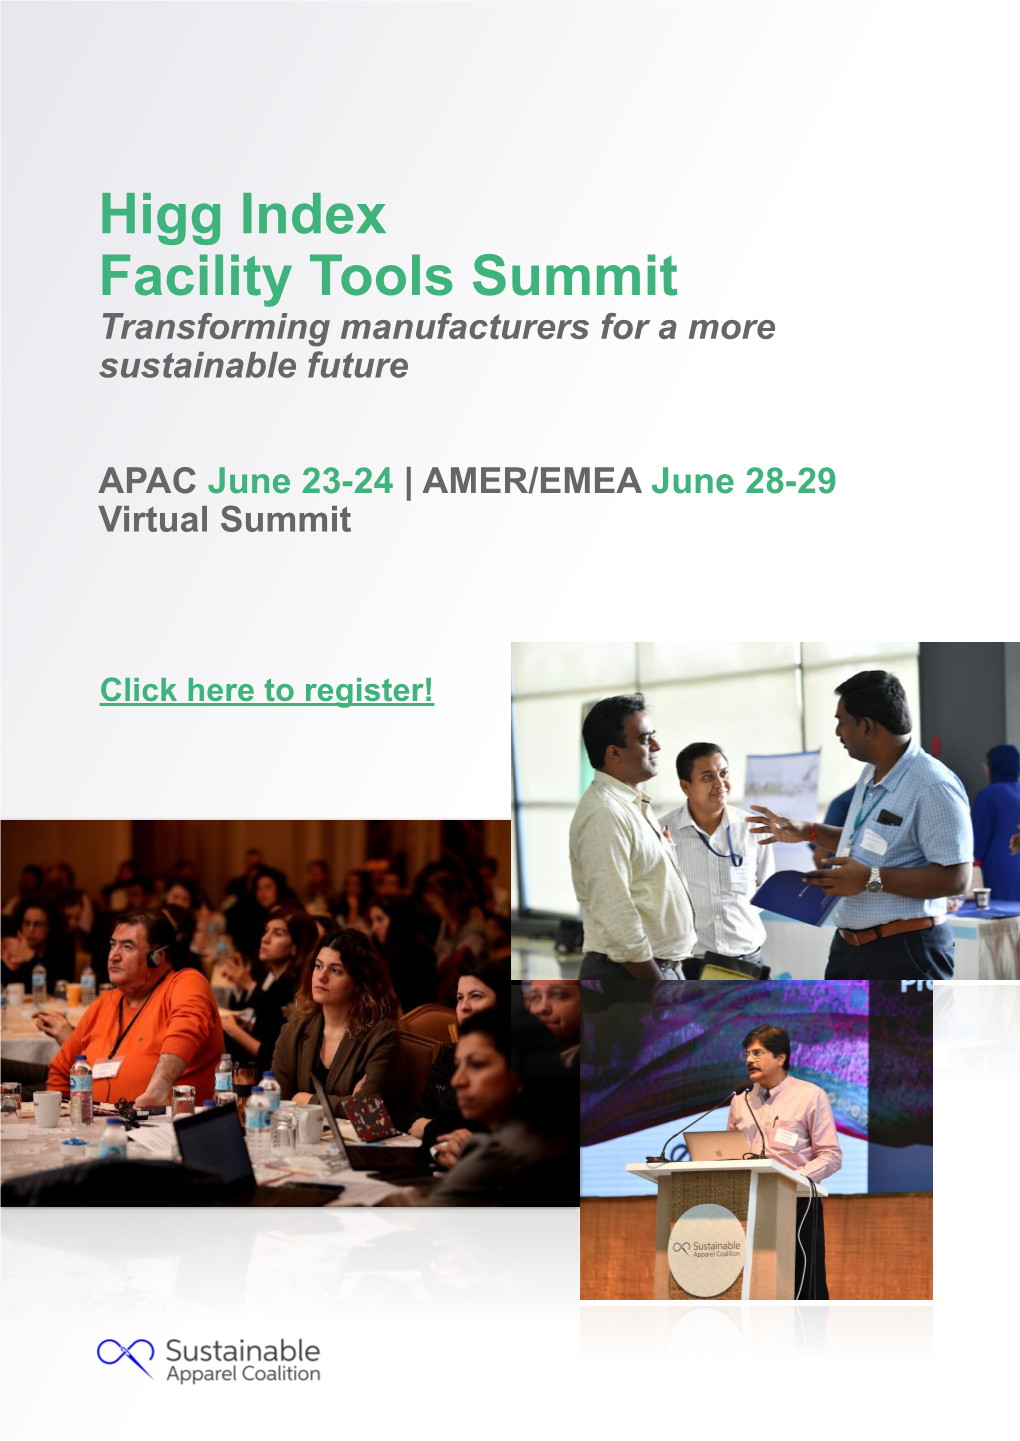 Higg Index Facility Tools Summit Transforming Manufacturers for a More Sustainable Future